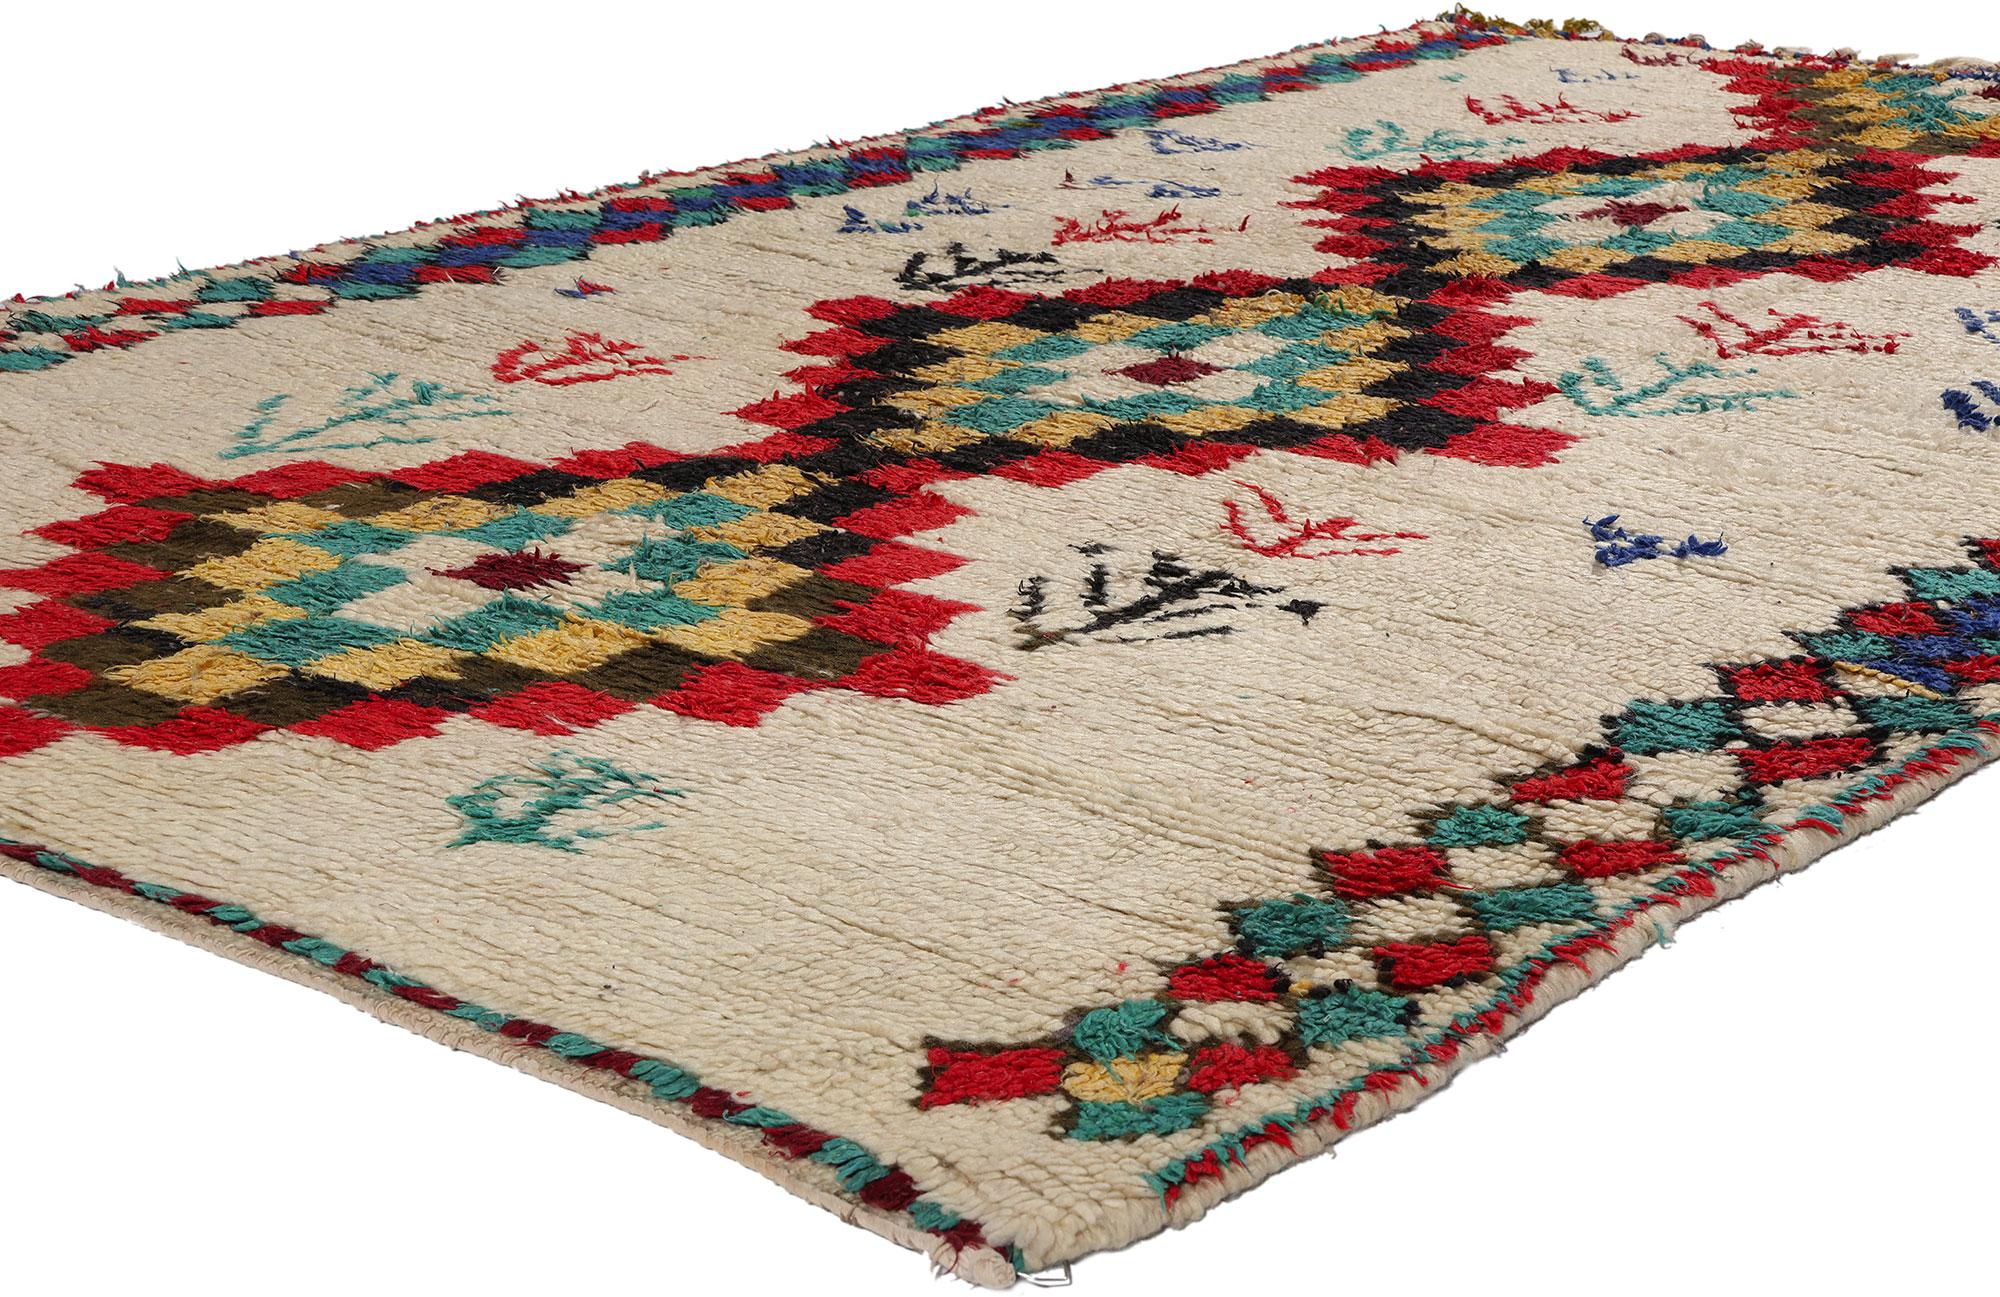 21751 Colorful Vintage Moroccan Azilal Rug, 05'04 x 09'00. Emerging with vibrant energy from the heart of central Morocco's provincial capital, nestled in the High Atlas Mountains, unfolds the dazzling legacy of Azilal rugs – a unique manifestation